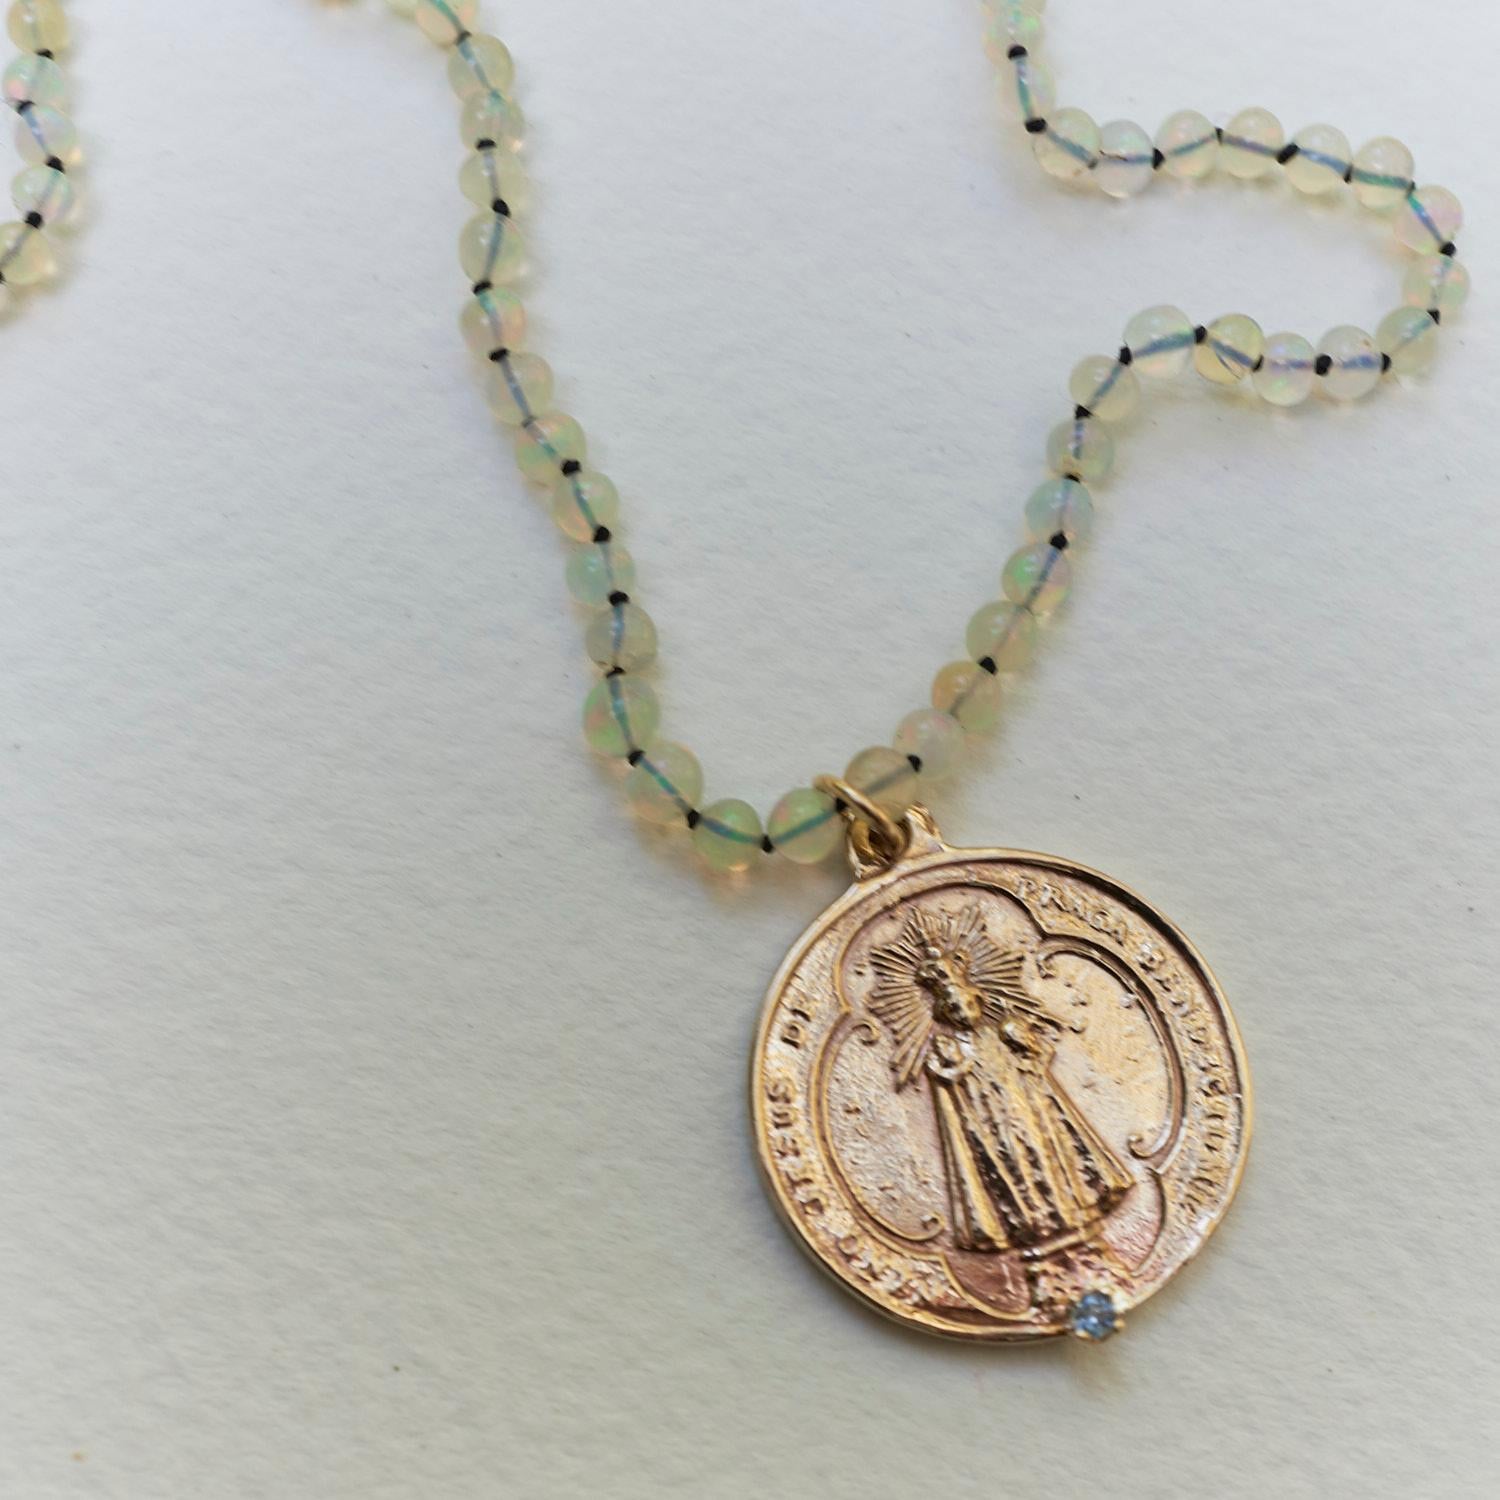 Contemporary Egyptian Opal Aquamarine Necklace Medal Virgin Mary Bronze J Dauphin For Sale